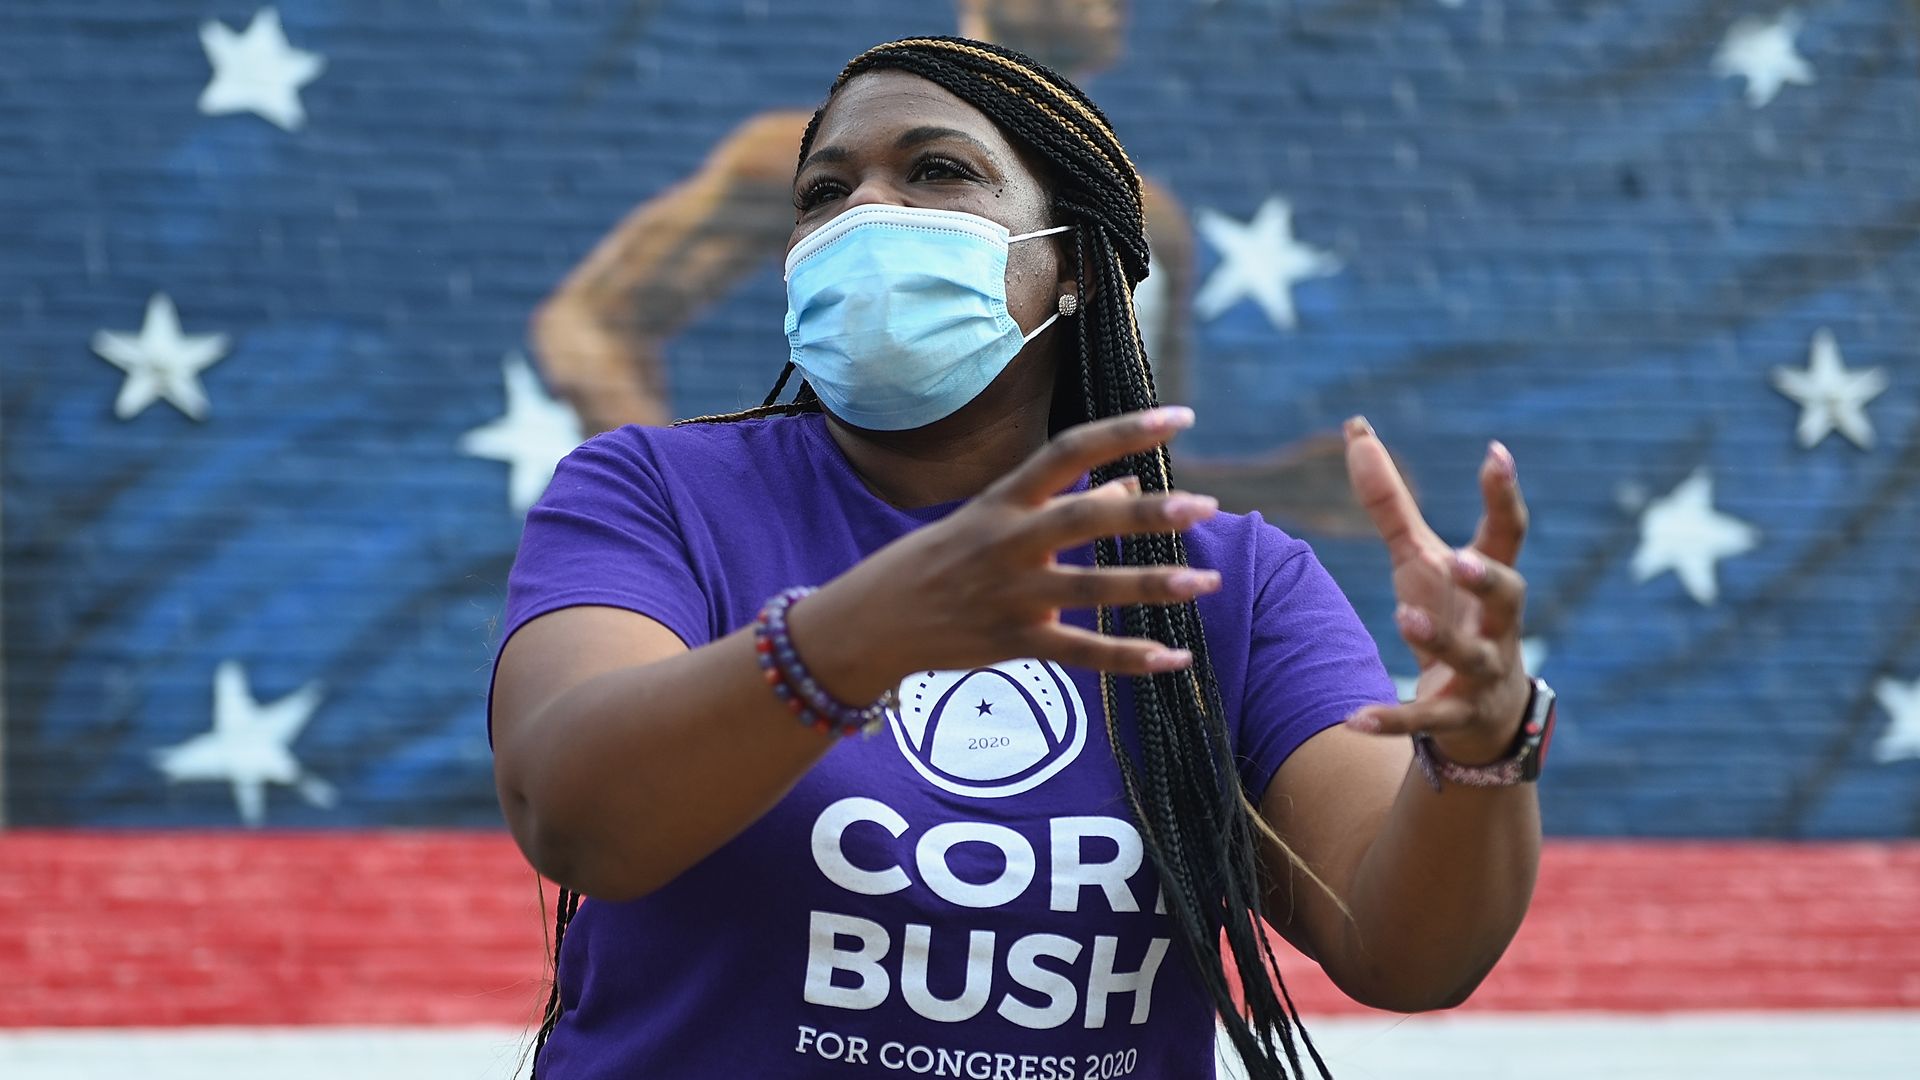 Missouri Democratic congressional candidate Cori Bush speaks to supporters during a canvassing event on August 3, 2020 in St Louis, Missouri.